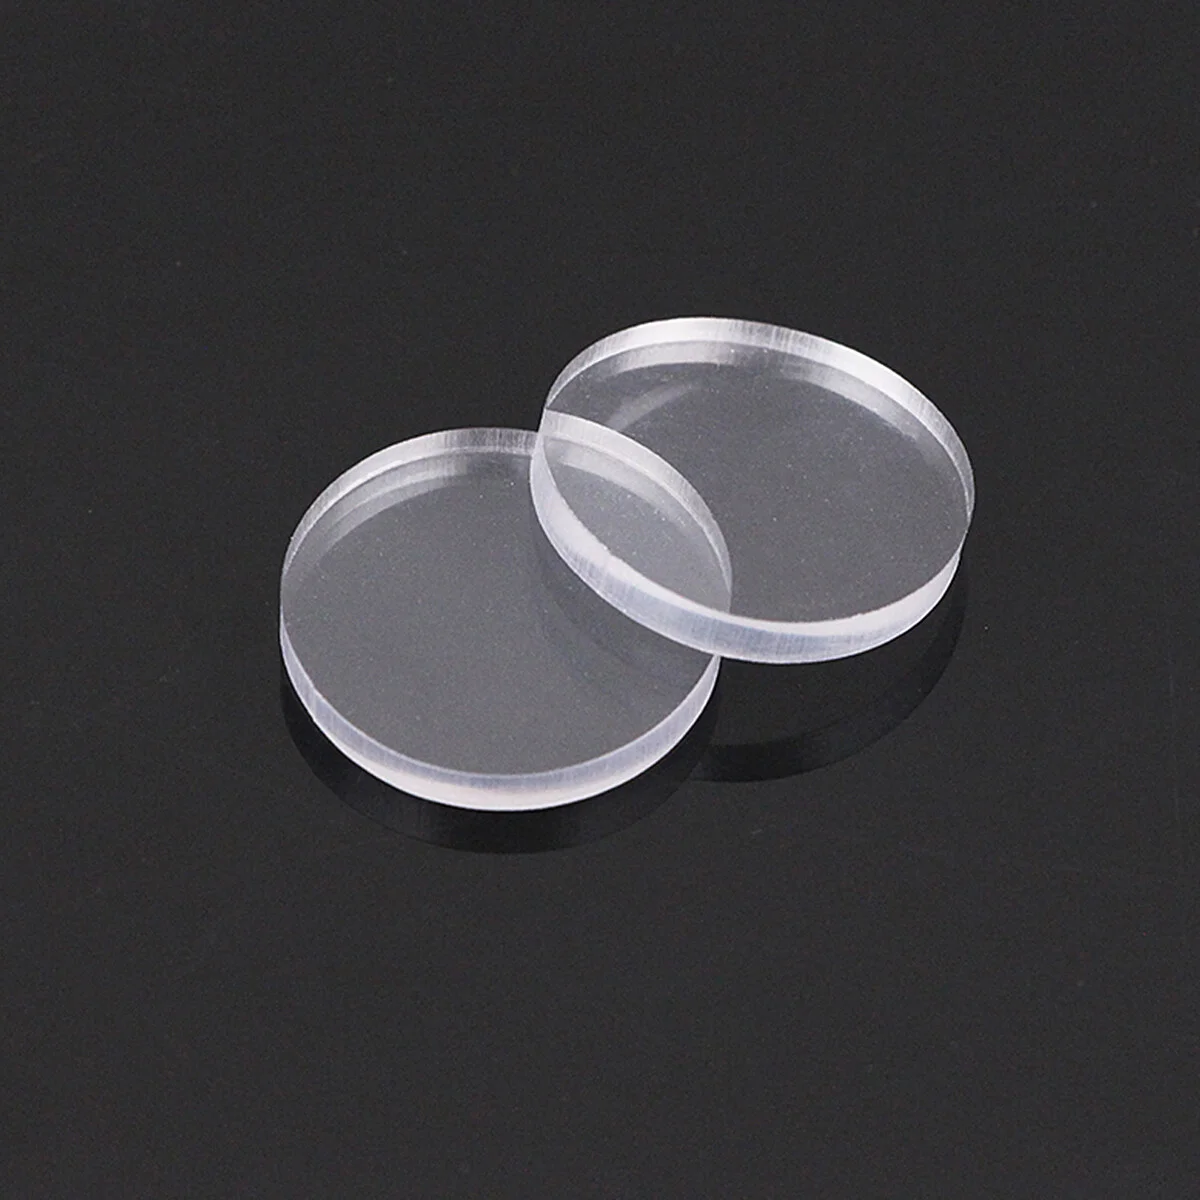 

10 Pcs Glass Suction Cup Gasket Round Picture Frame Combination Pp Plastic Tile Adhesive